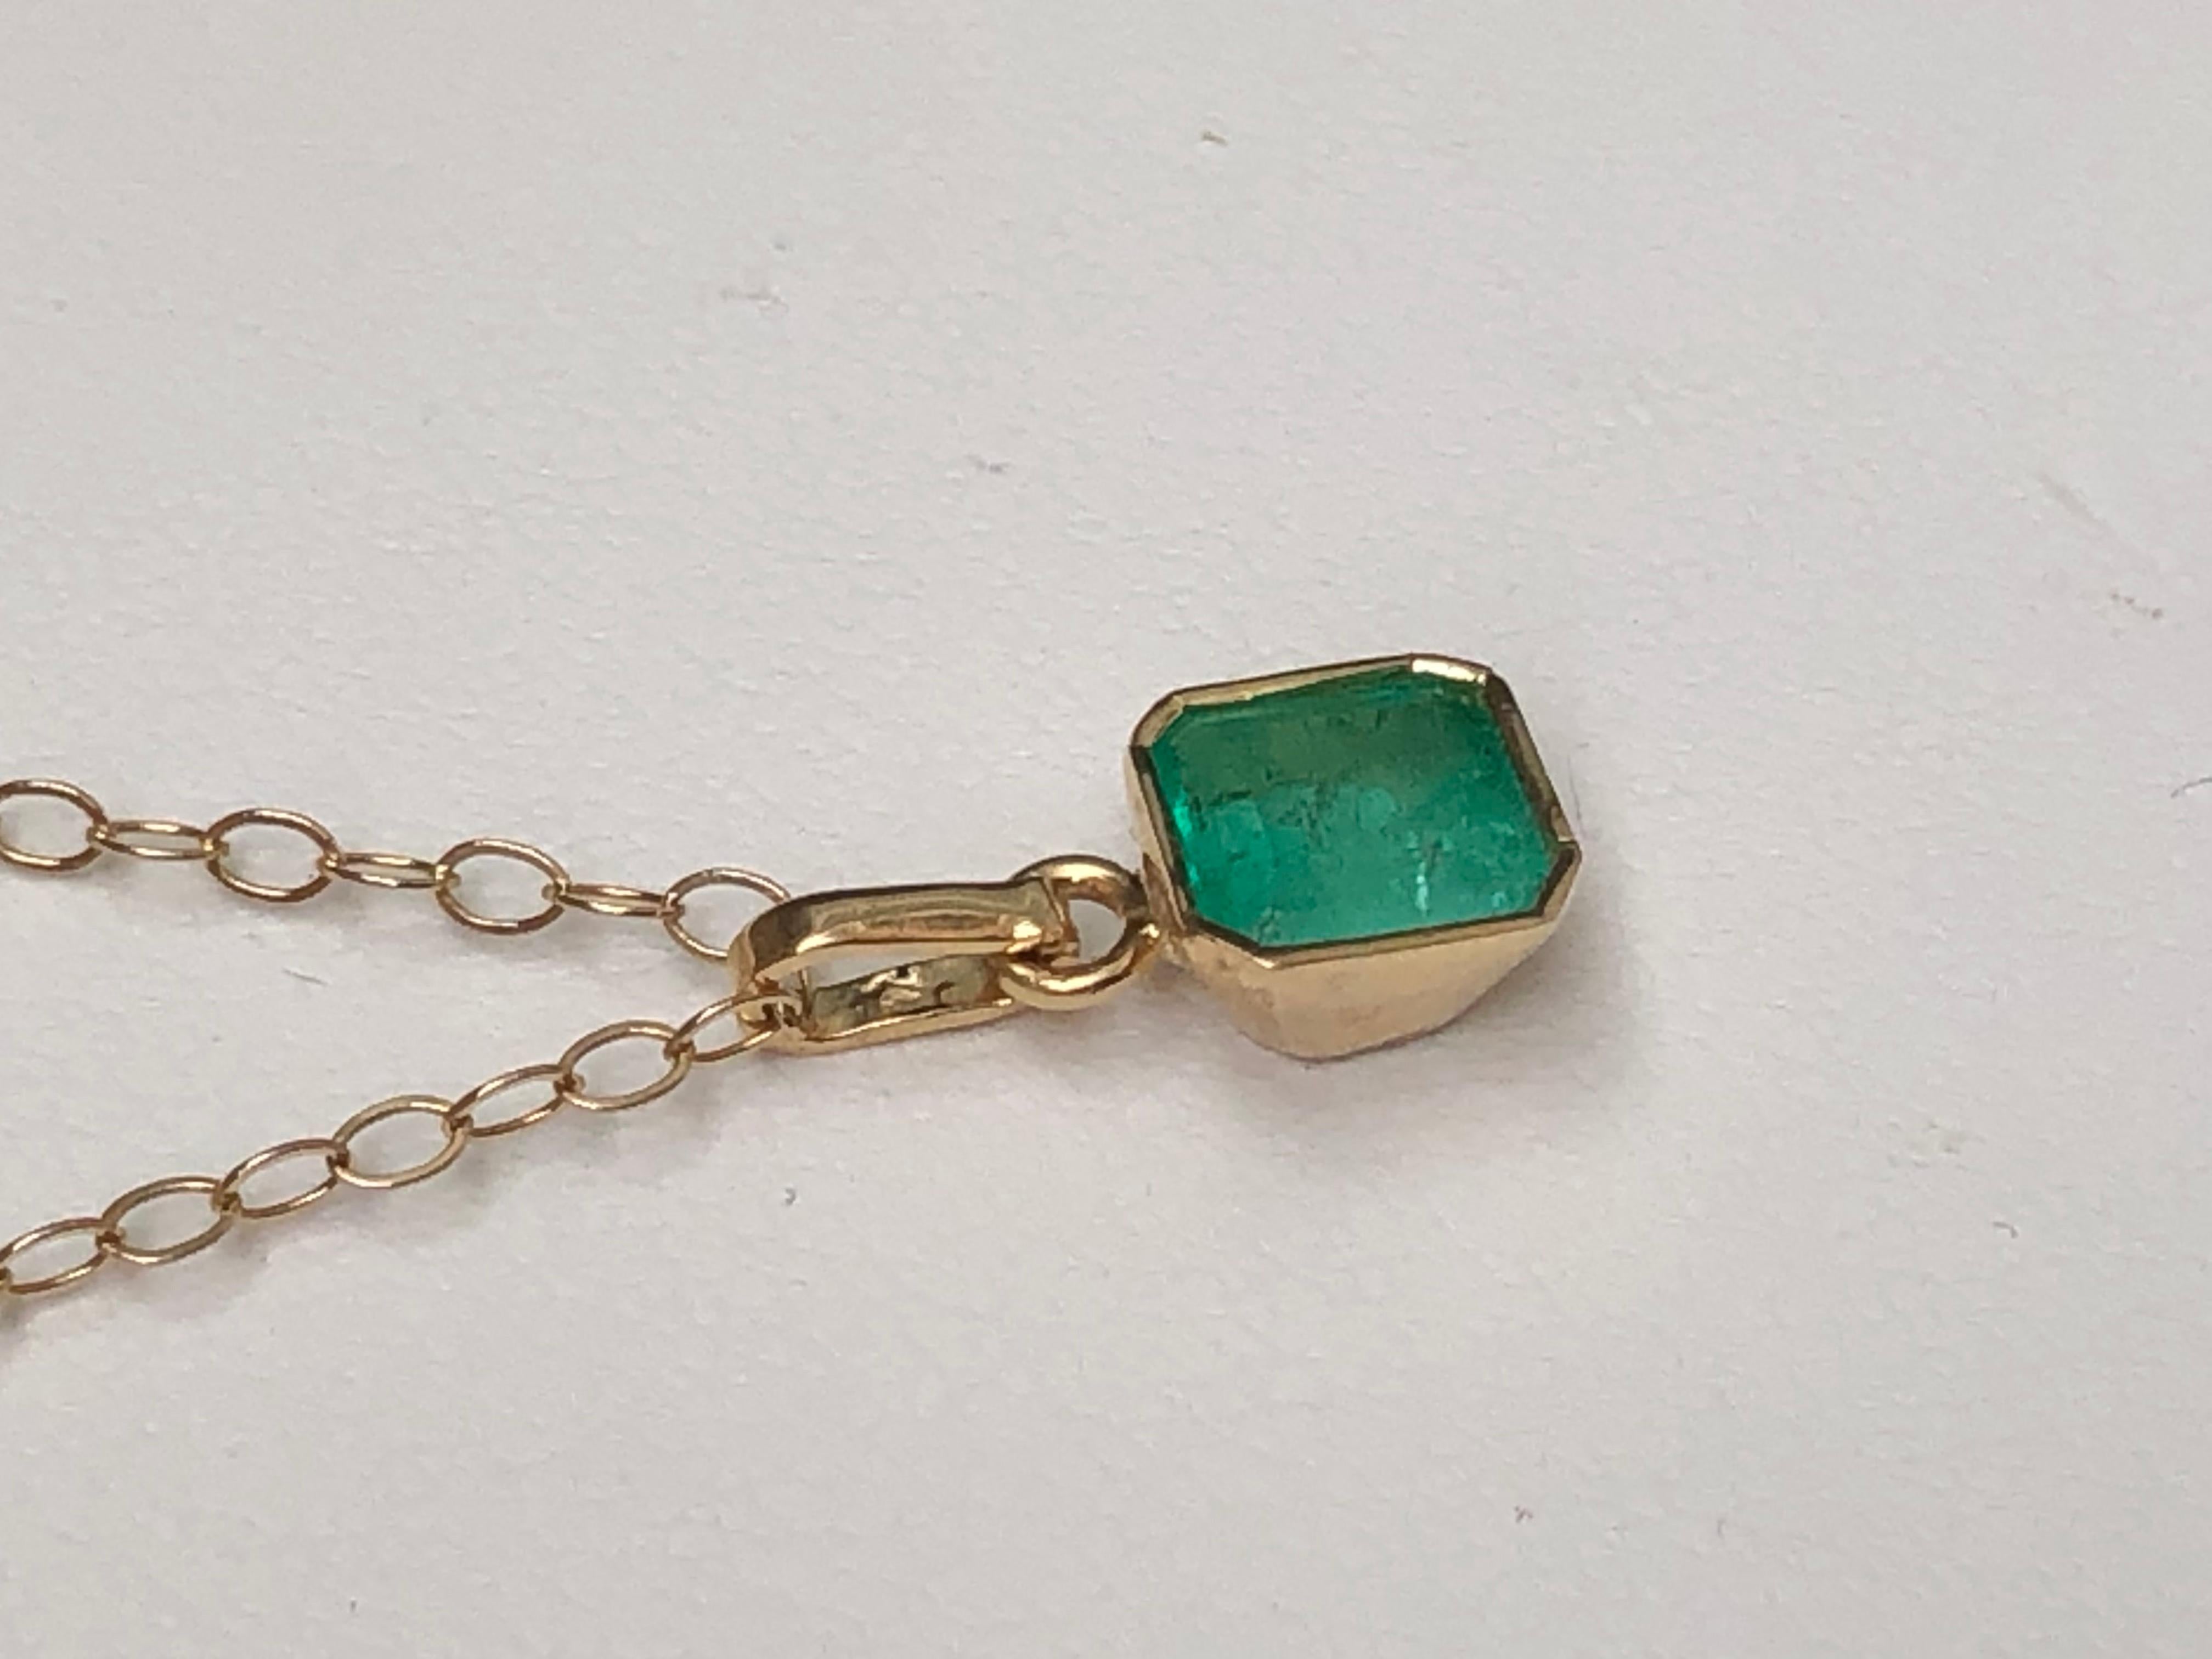 1.50 Carat Colombian Natural Green Emerald Solitaire Charm Pendant 18 Karat
Primary Stones: Natural Colombian Emerald
Shape or Cut : Emerald Cut
Average Color/Clarity : Medium Green Color 100% NATURAL/ Clarity VS
Total Emerald Weight : 1.50 carats